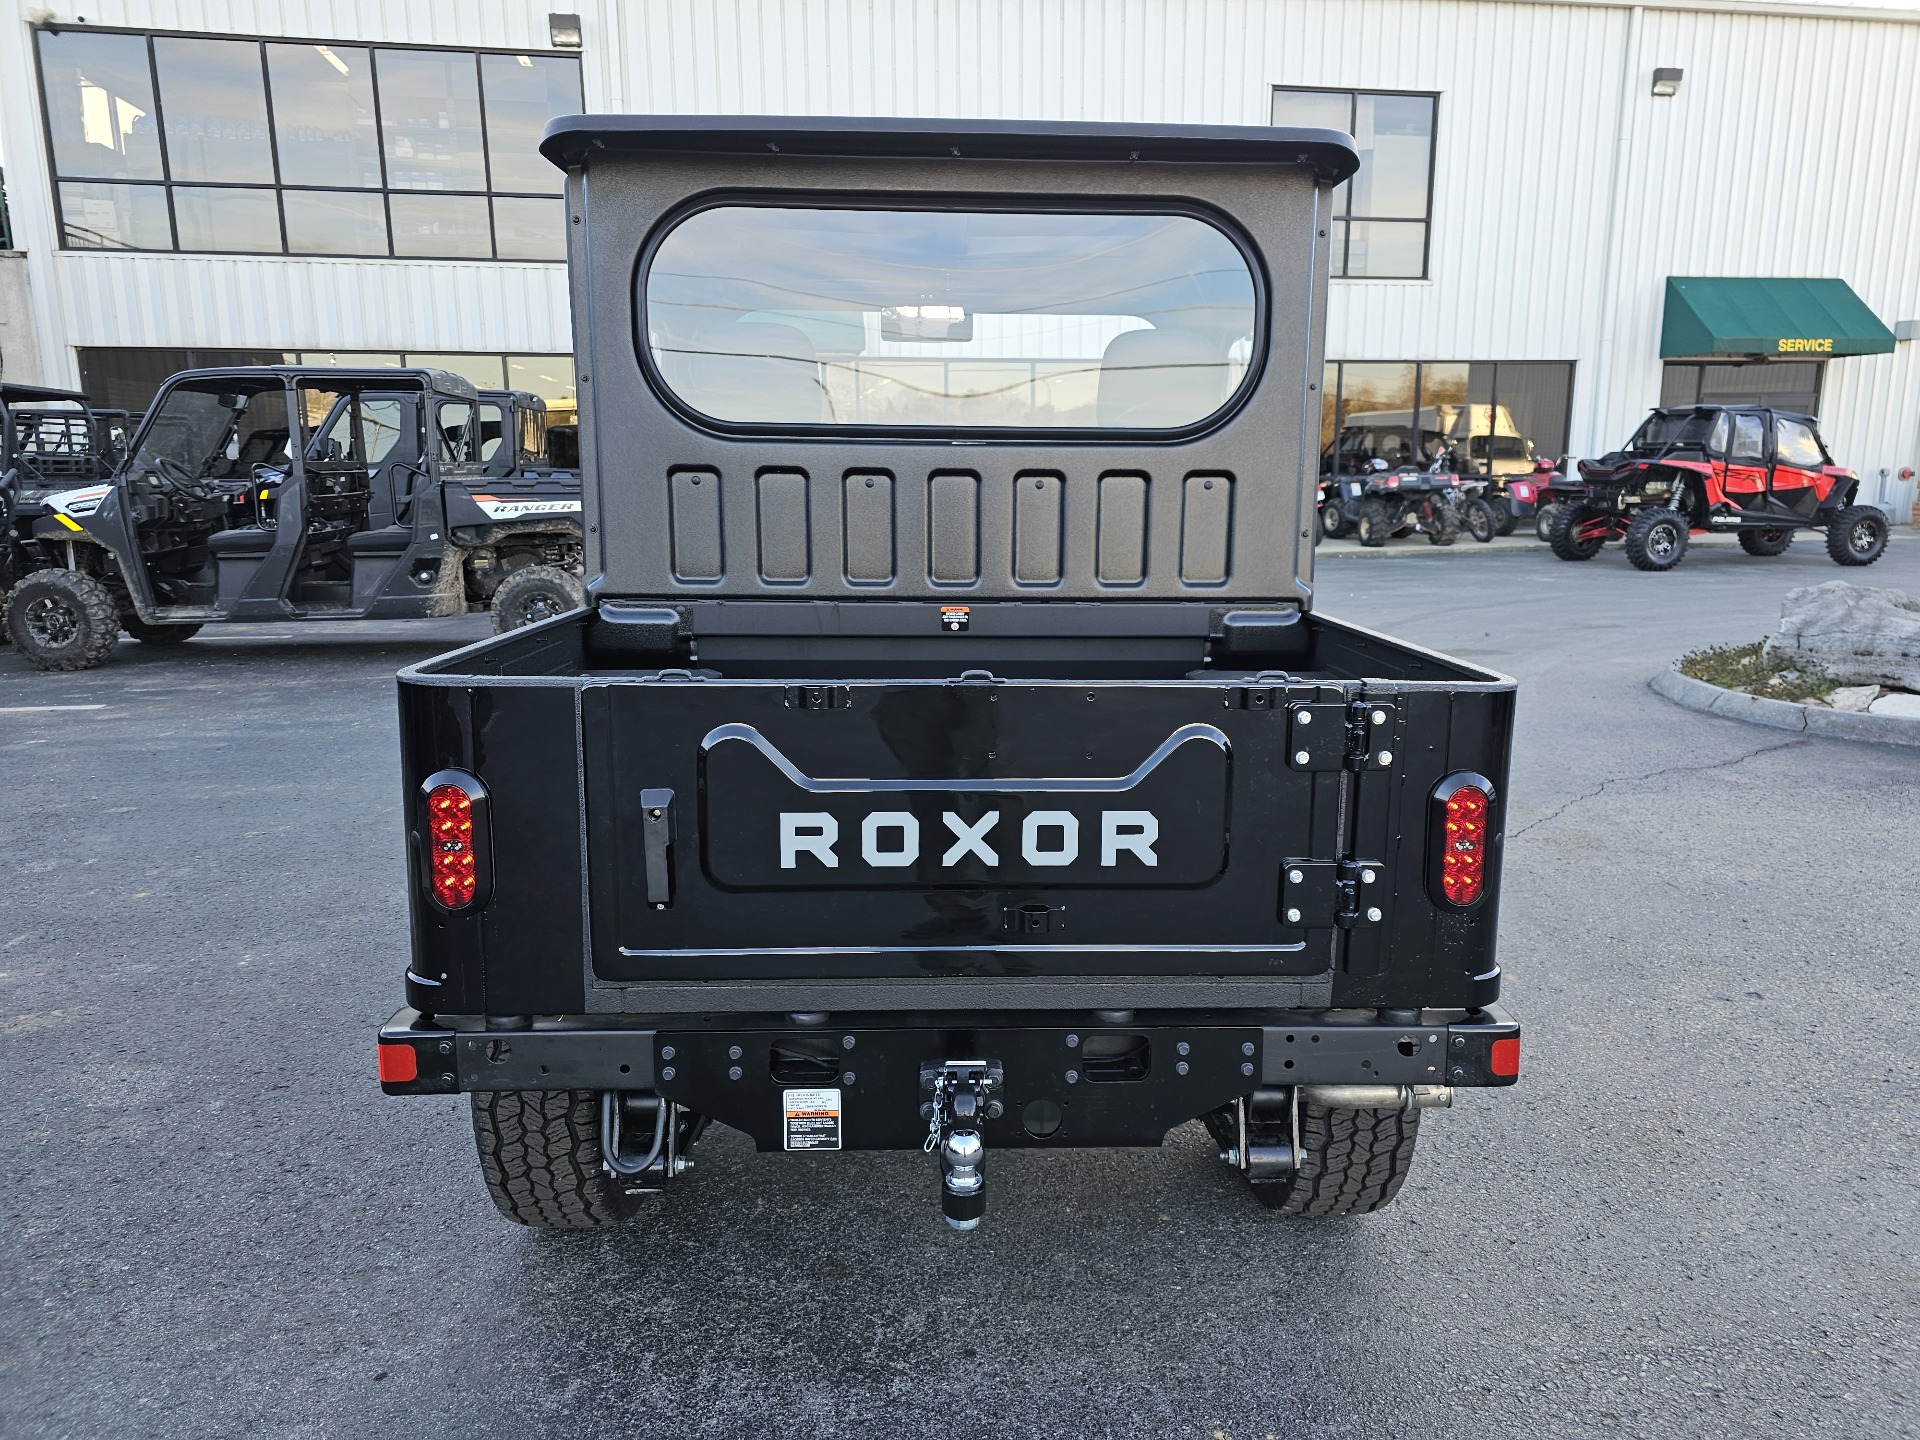 2024 Mahindra Roxor All-Weather Model in Clinton, Tennessee - Photo 7